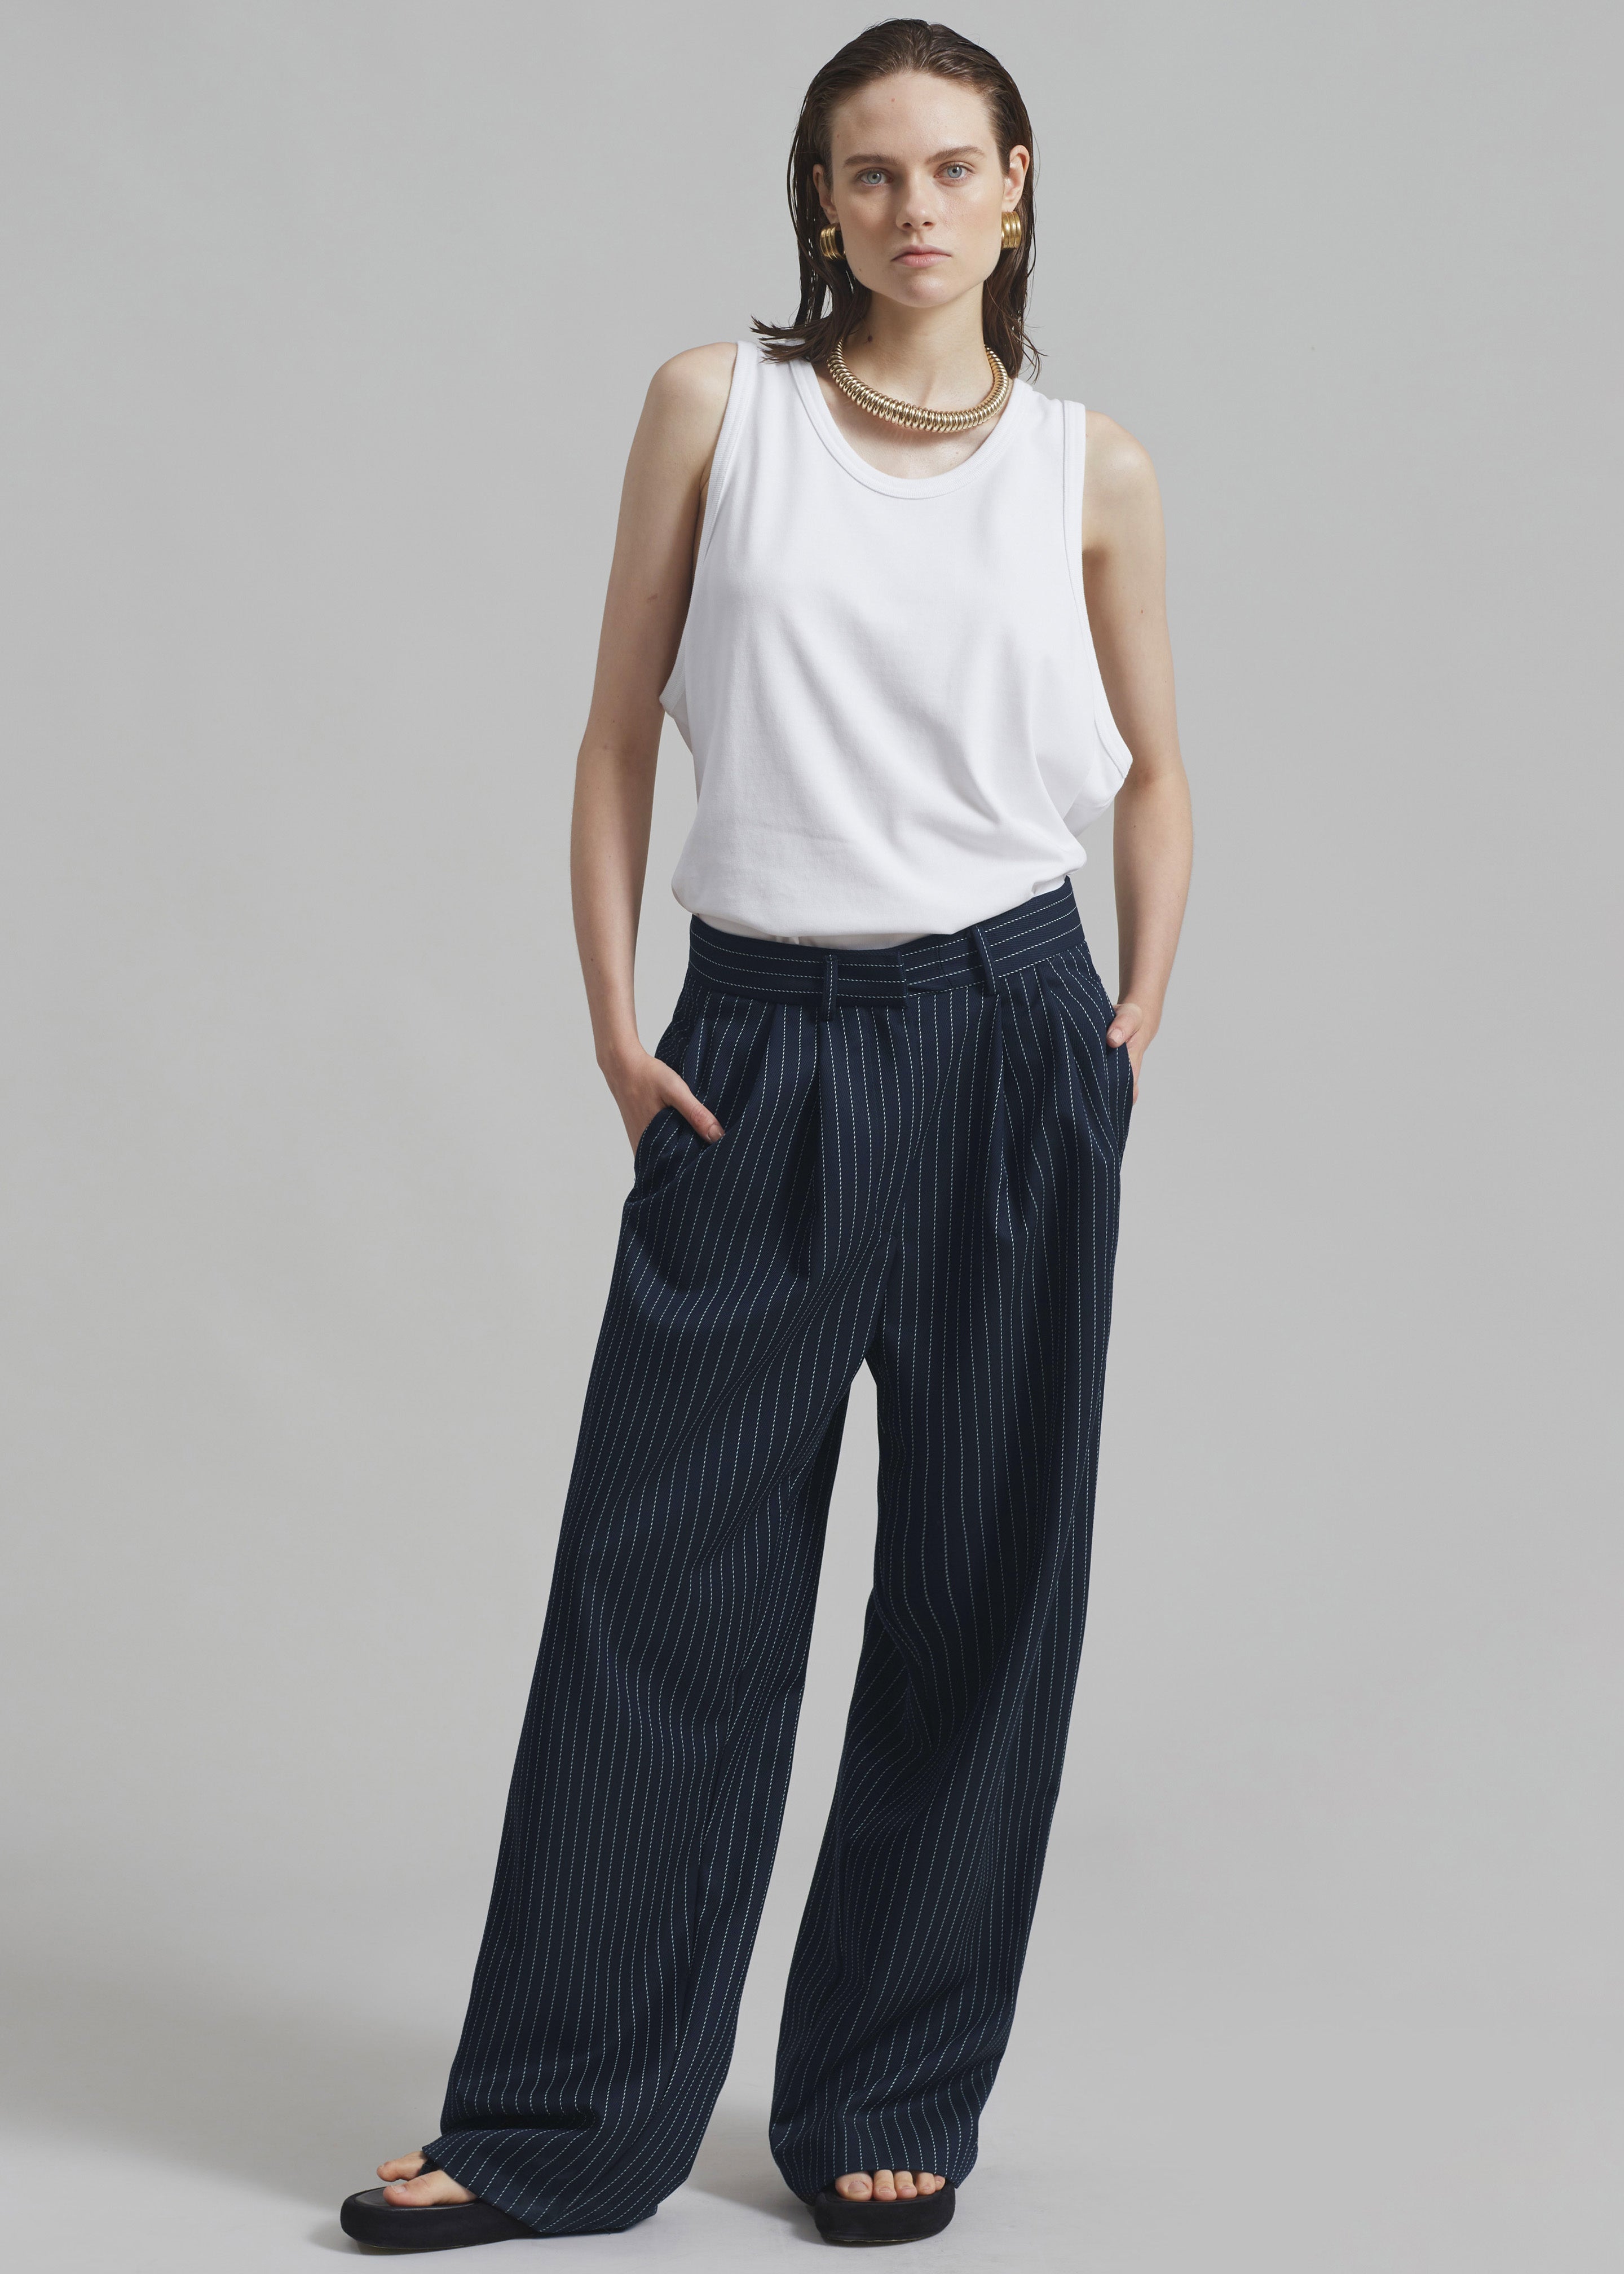 Ripley Pleated Twill Trousers - Navy/White Pinstripe - 4